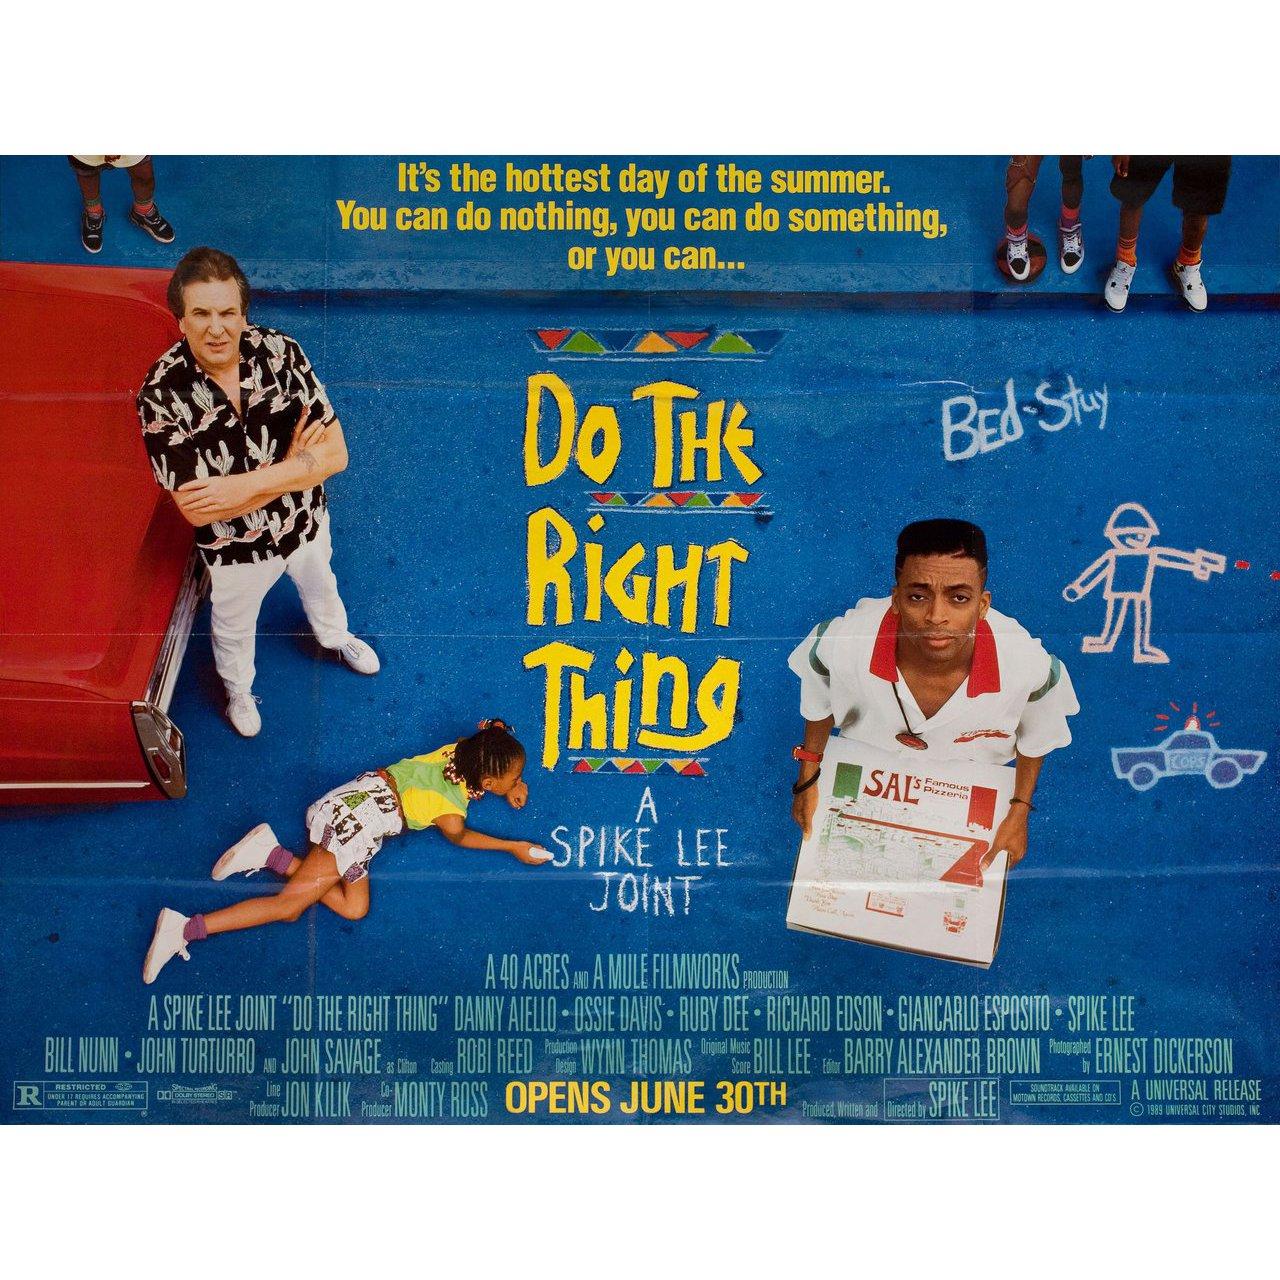 Original 1989 U.S. subway poster for the film Do the Right Thing directed by Spike Lee with Danny Aiello / John Turturro / Ossie Davis / Ruby Dee / Richard Edson. Very good-fine condition, folded. Many original posters were issued folded or were